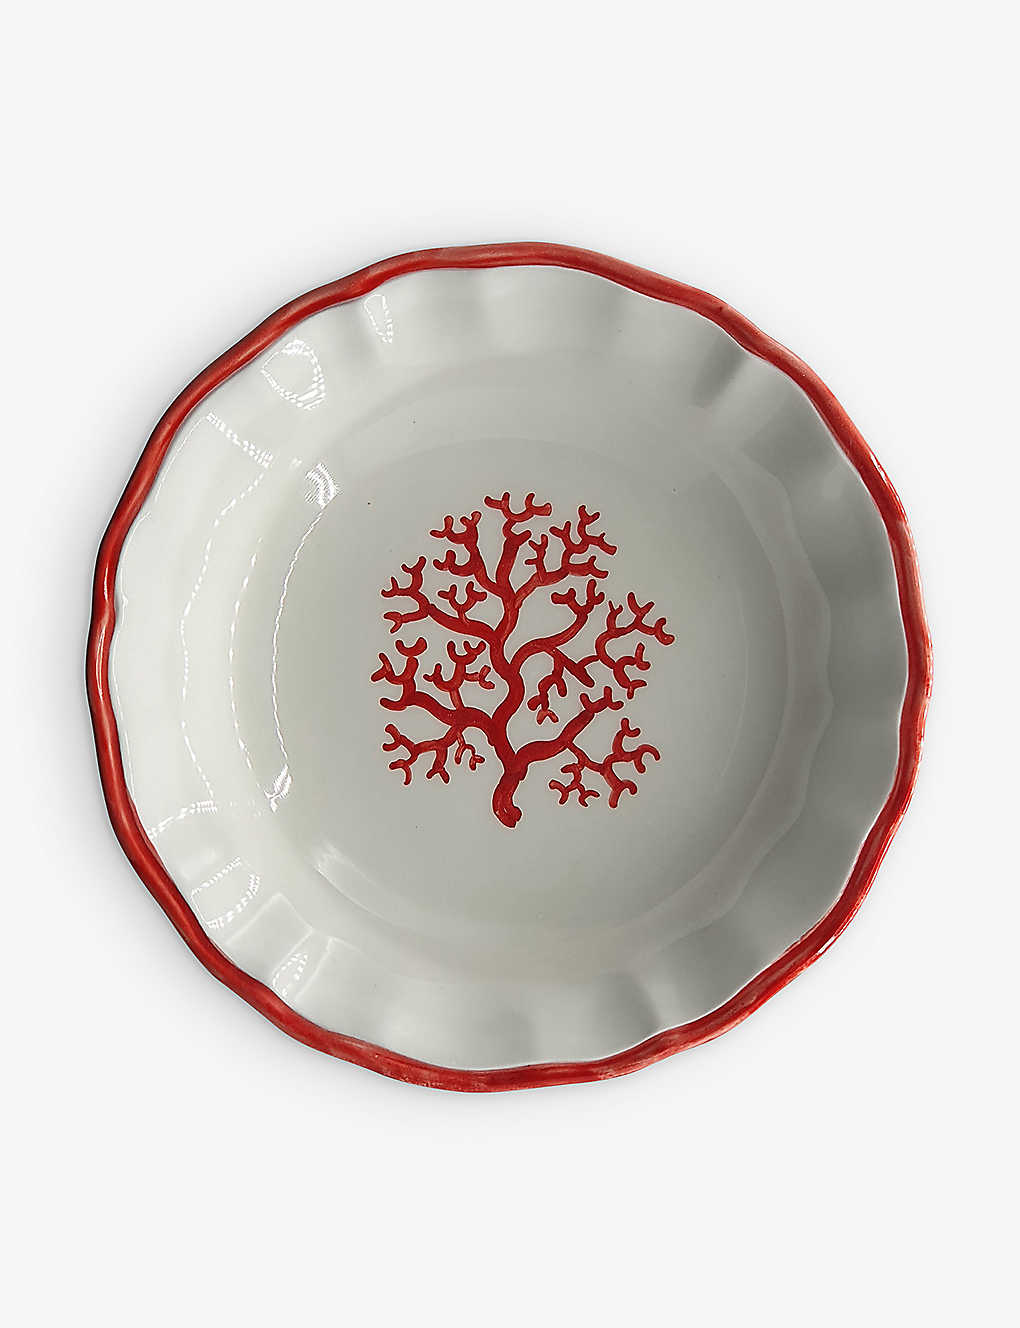 Les Ottomans Red Coral Hand-painted Ceramic Bowl 22cm